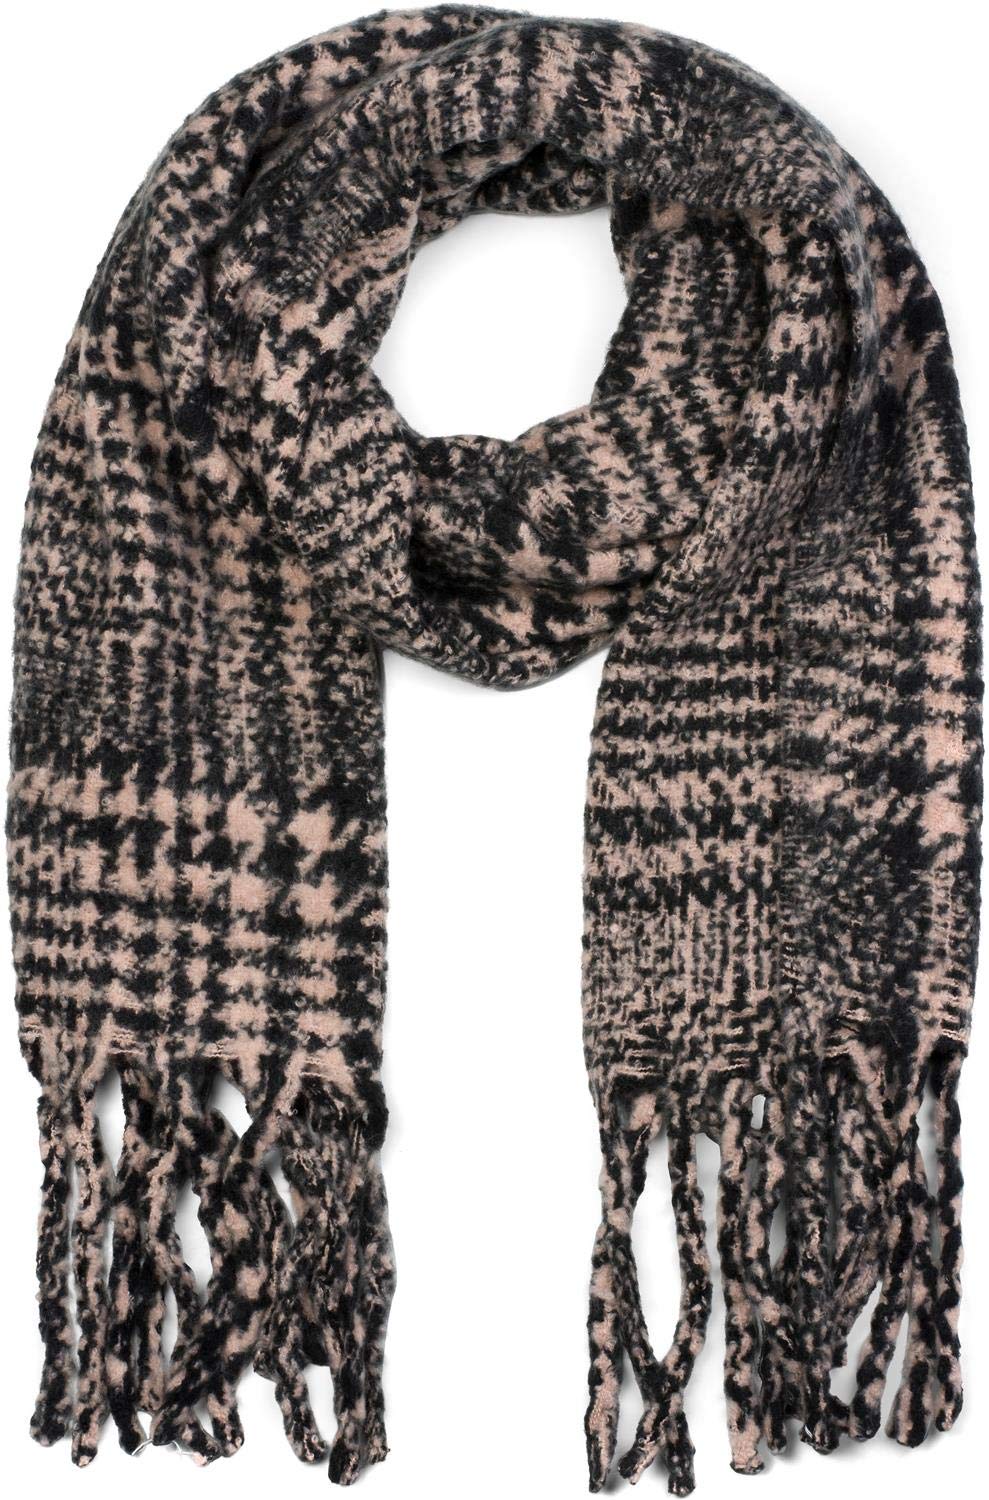 [Australia] - styleBREAKER women scarf with check print and long fringing, winter scarf, stole, shawl 01017102 One Size Rose-black 